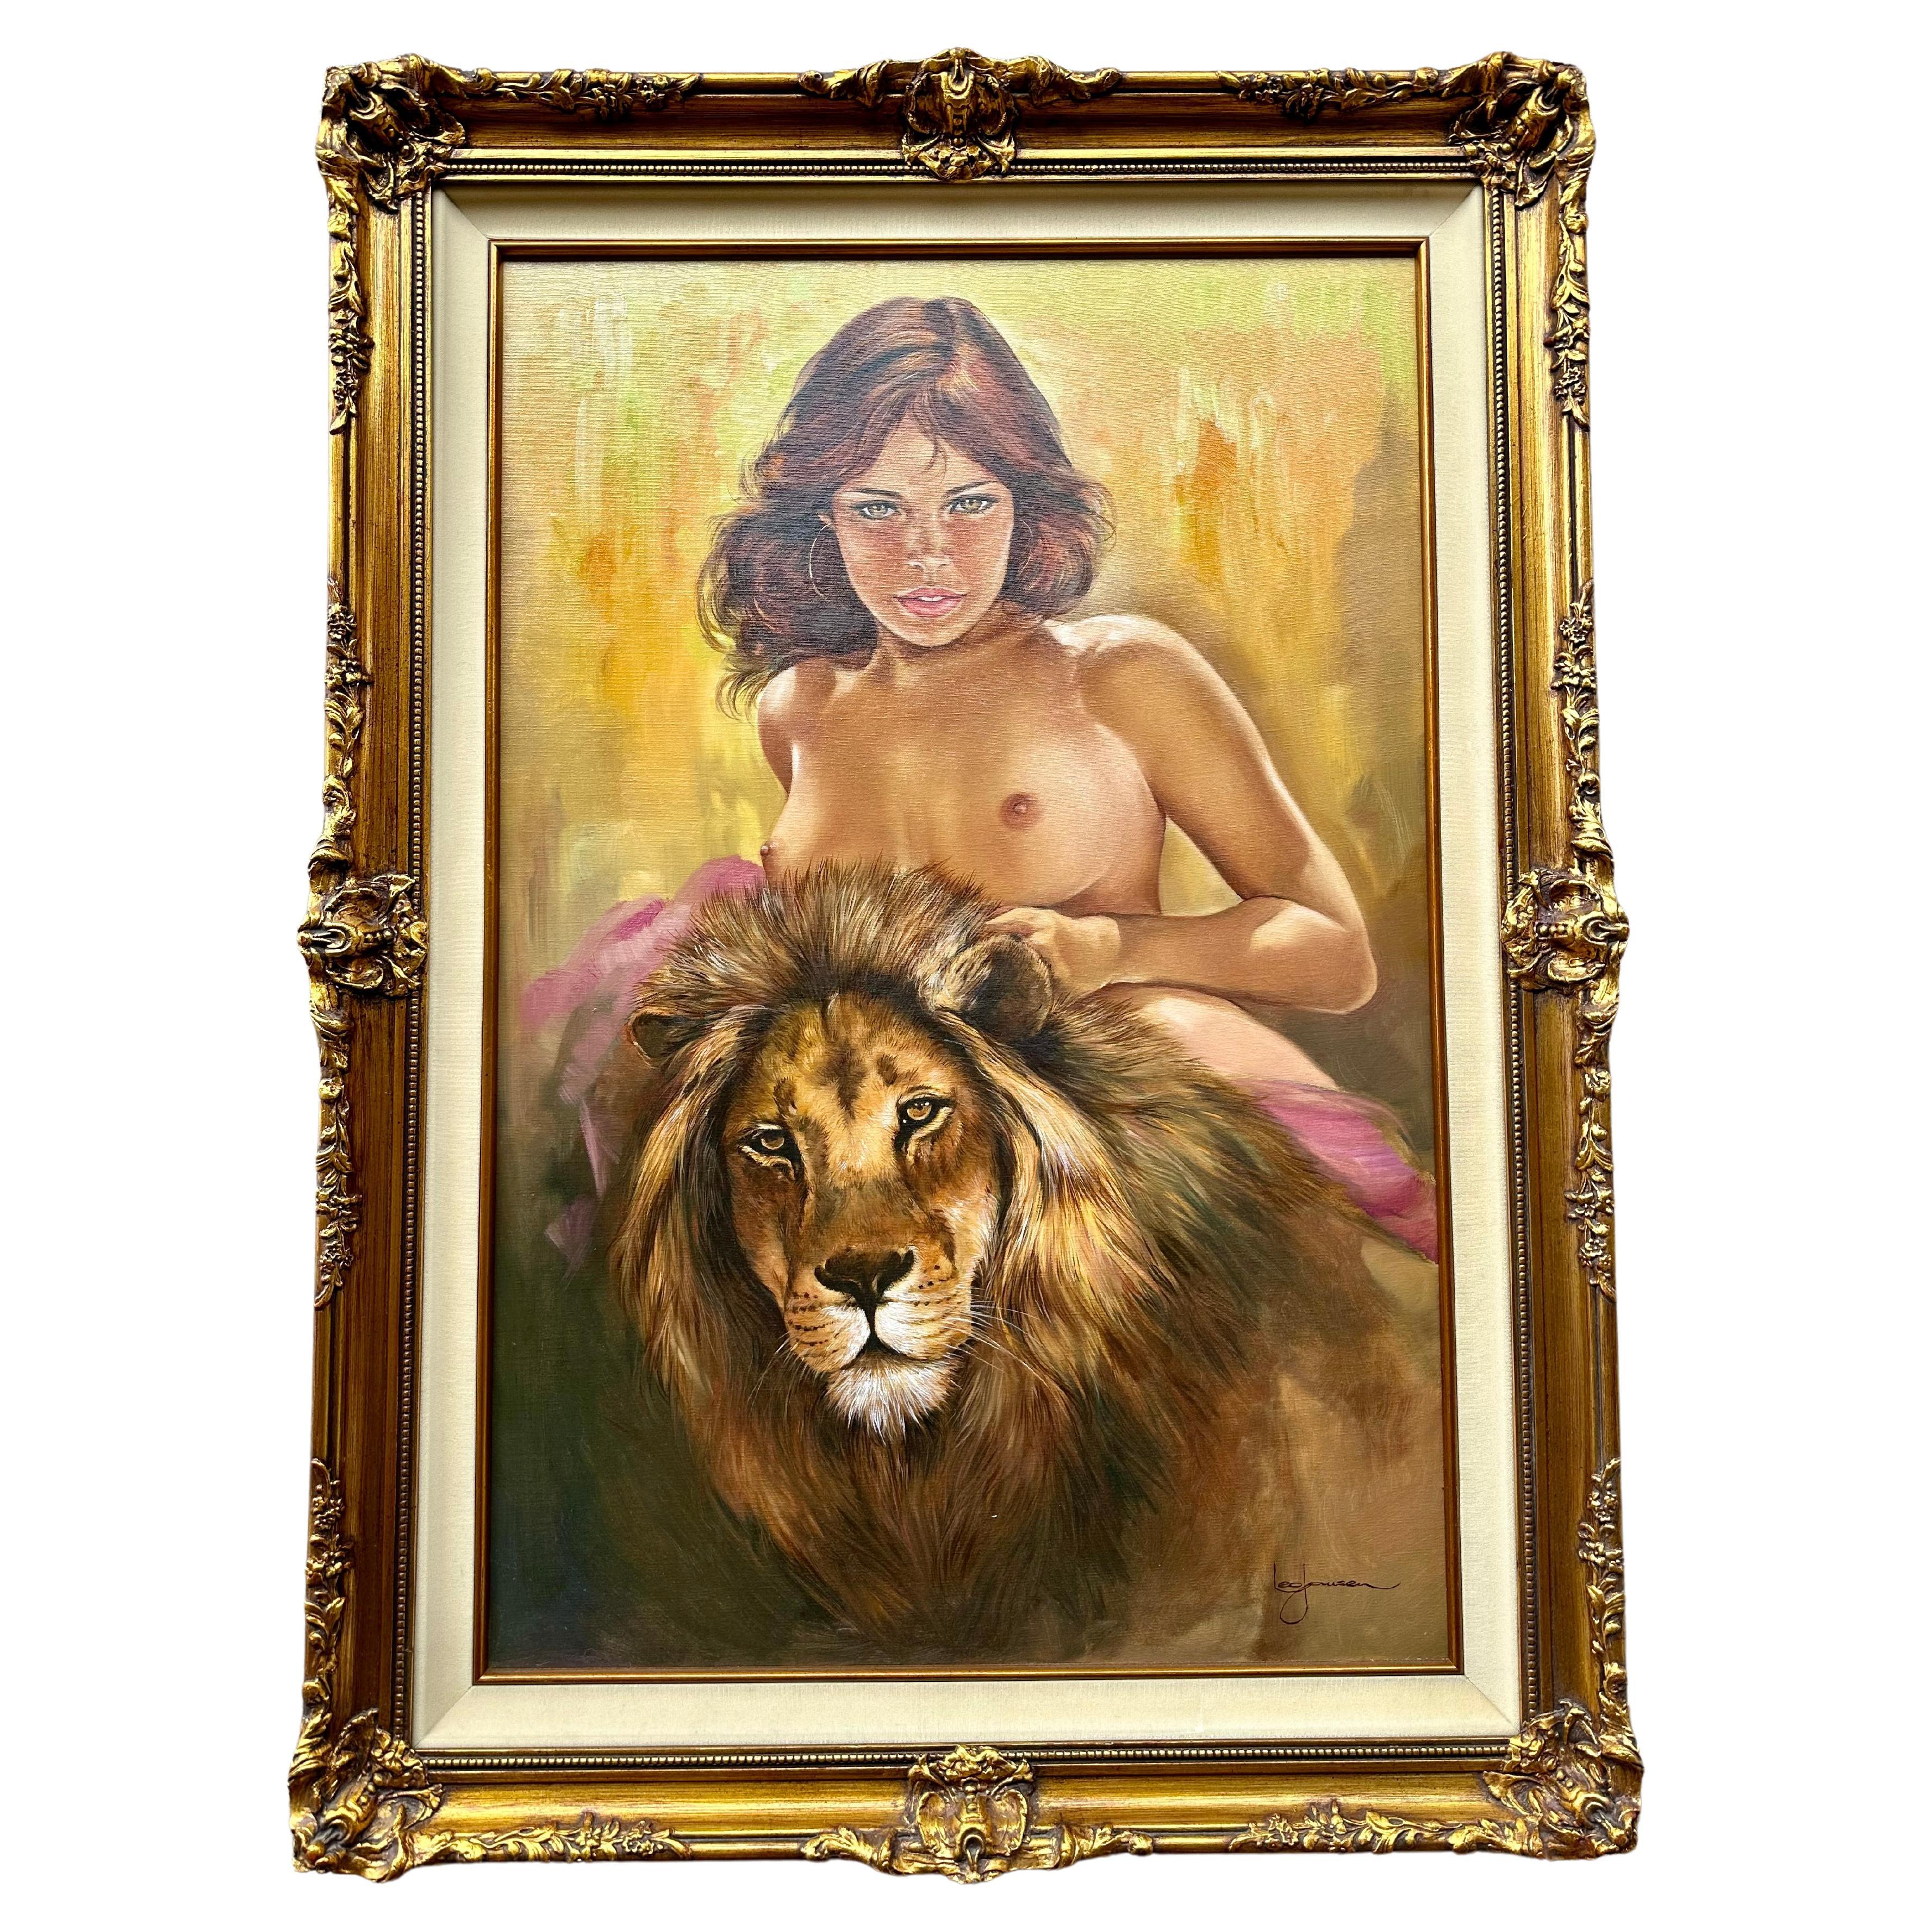 Original Playboy Artist Leo Jansen Oil Painting of a Nude Girl With a Lion  For Sale